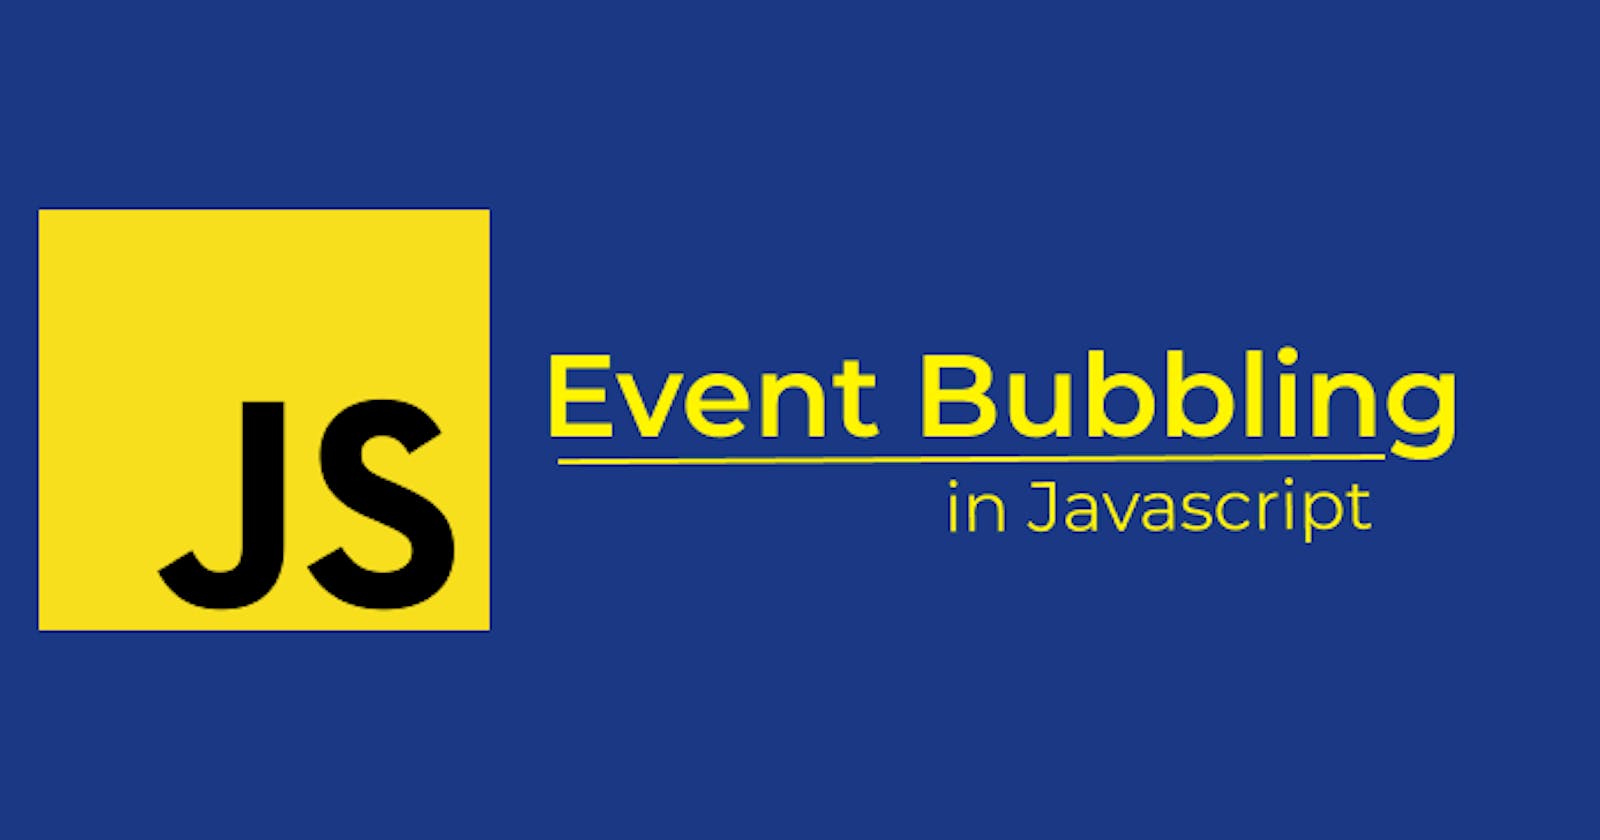 Event Bubbling in JavaScript